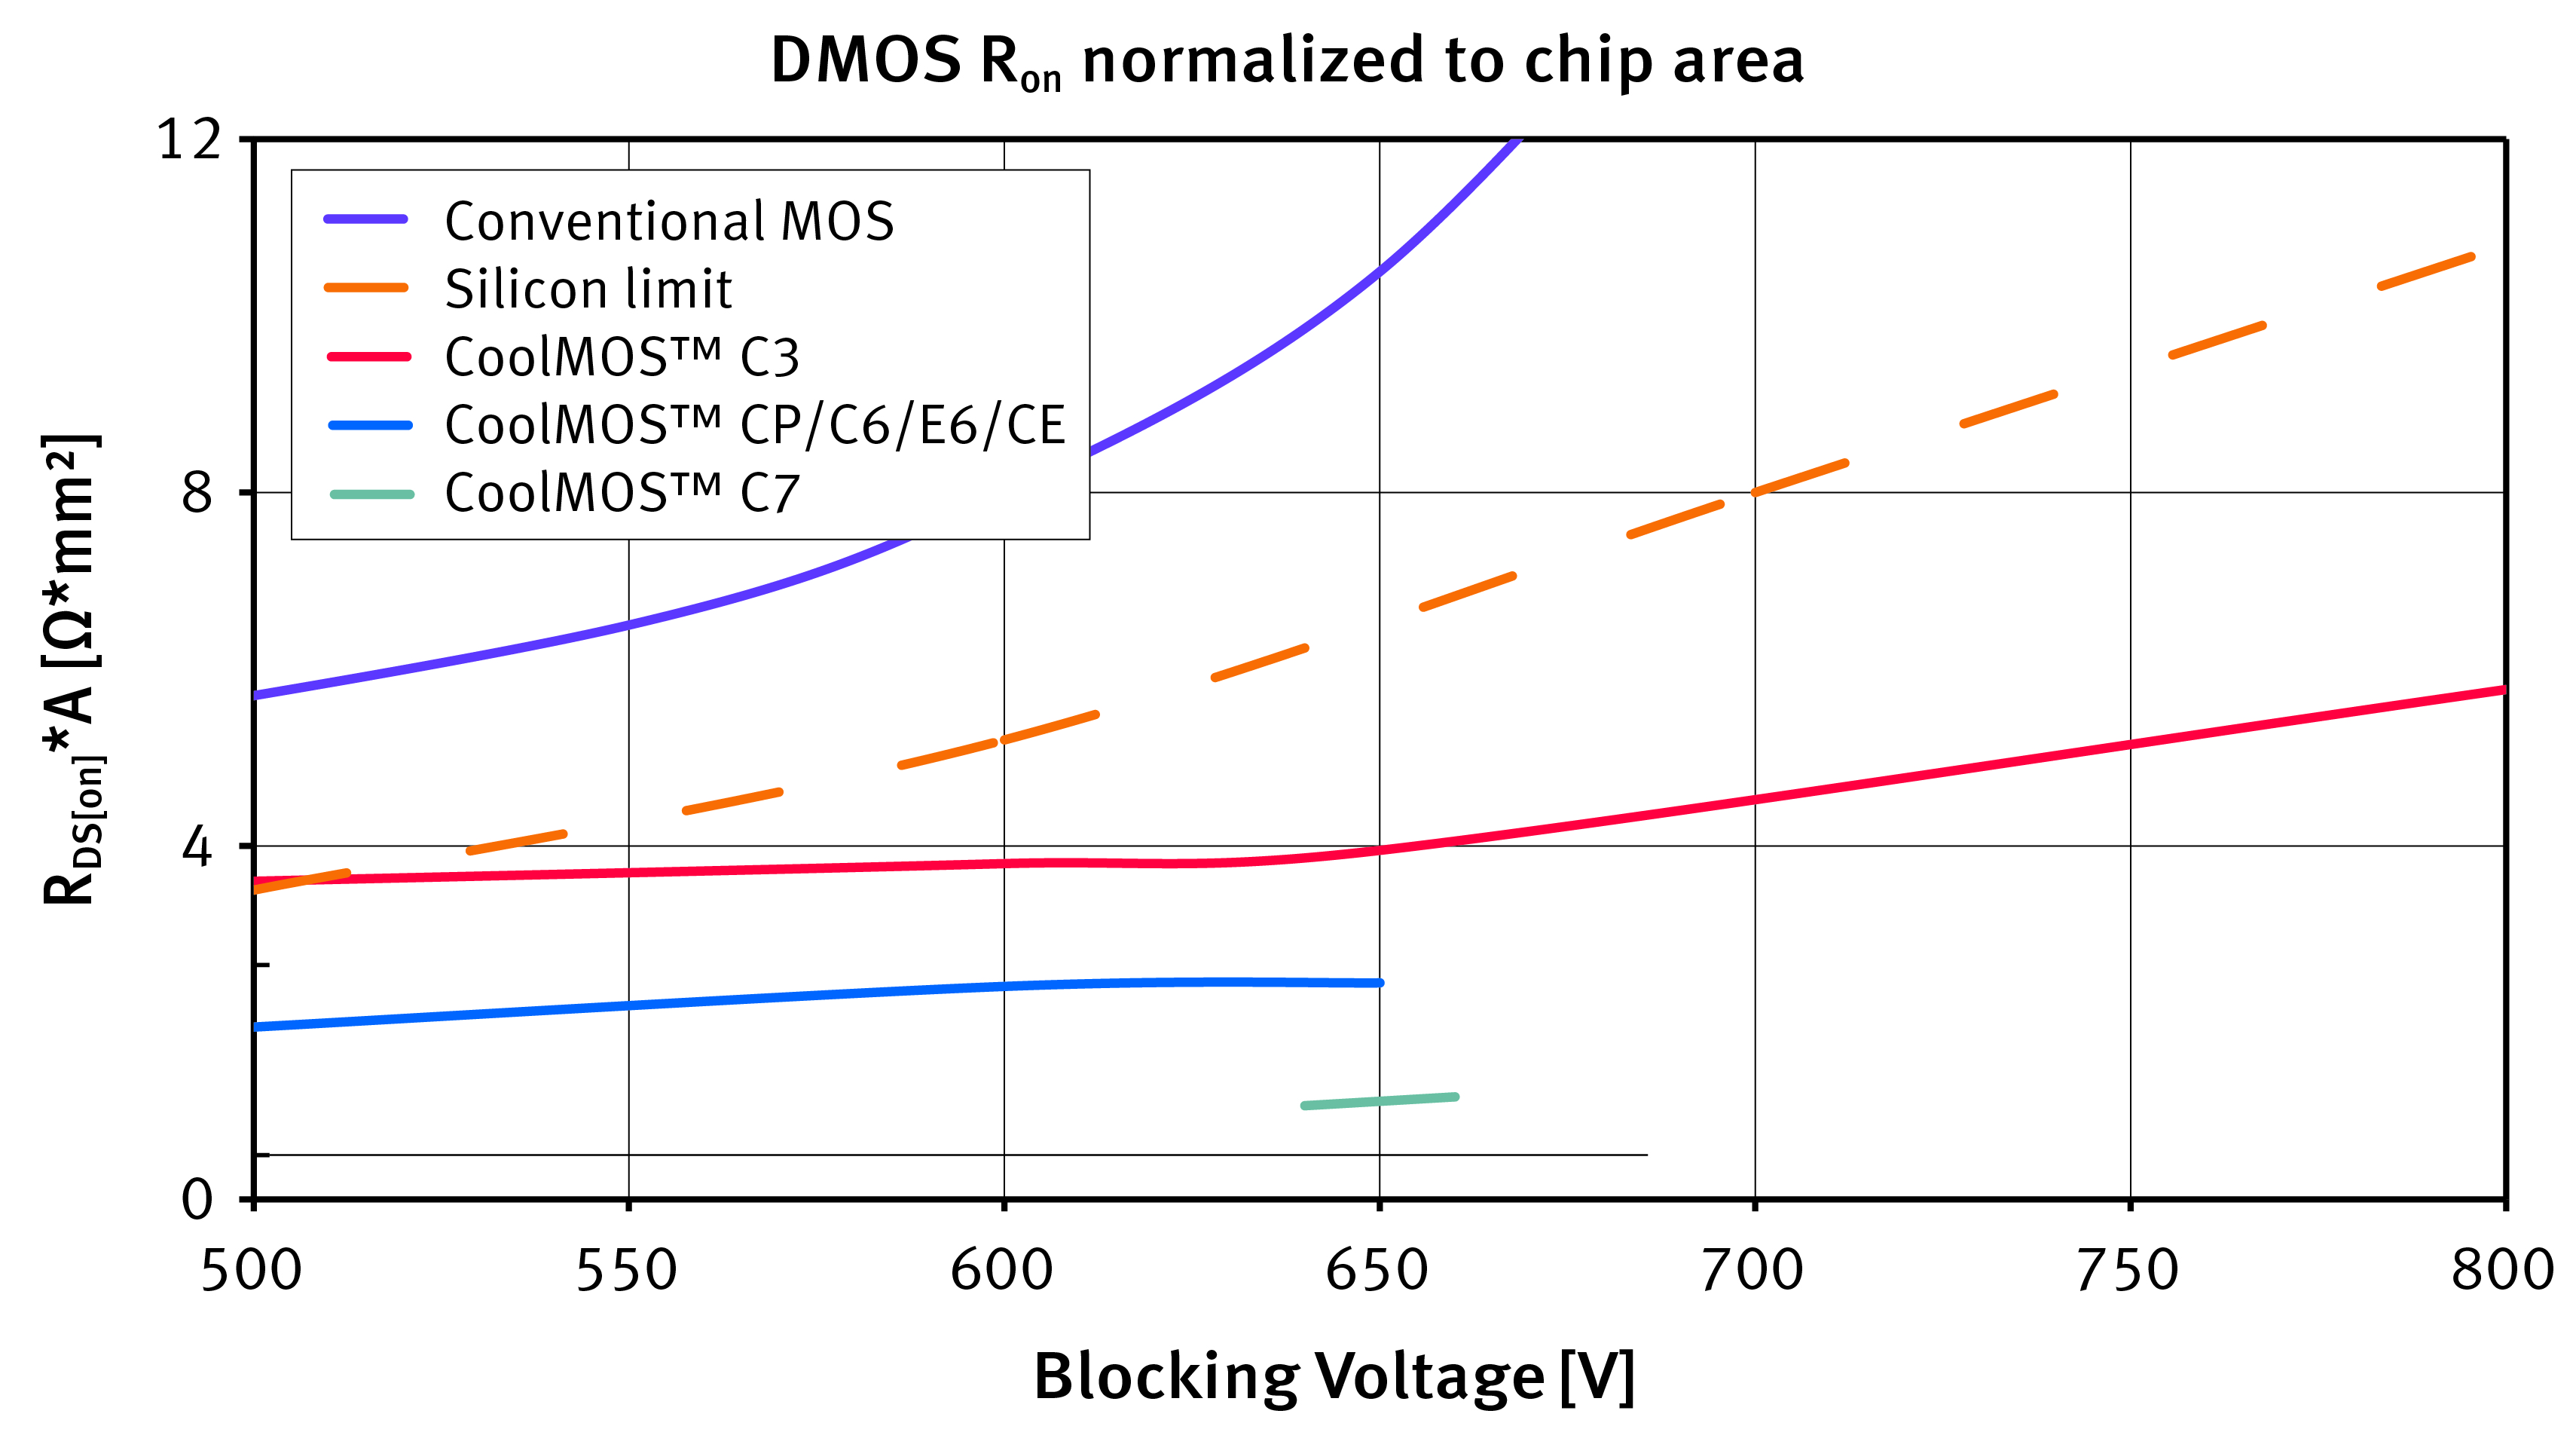 Next-generation SJ MOSFETs extend performance of silicon-based power devices